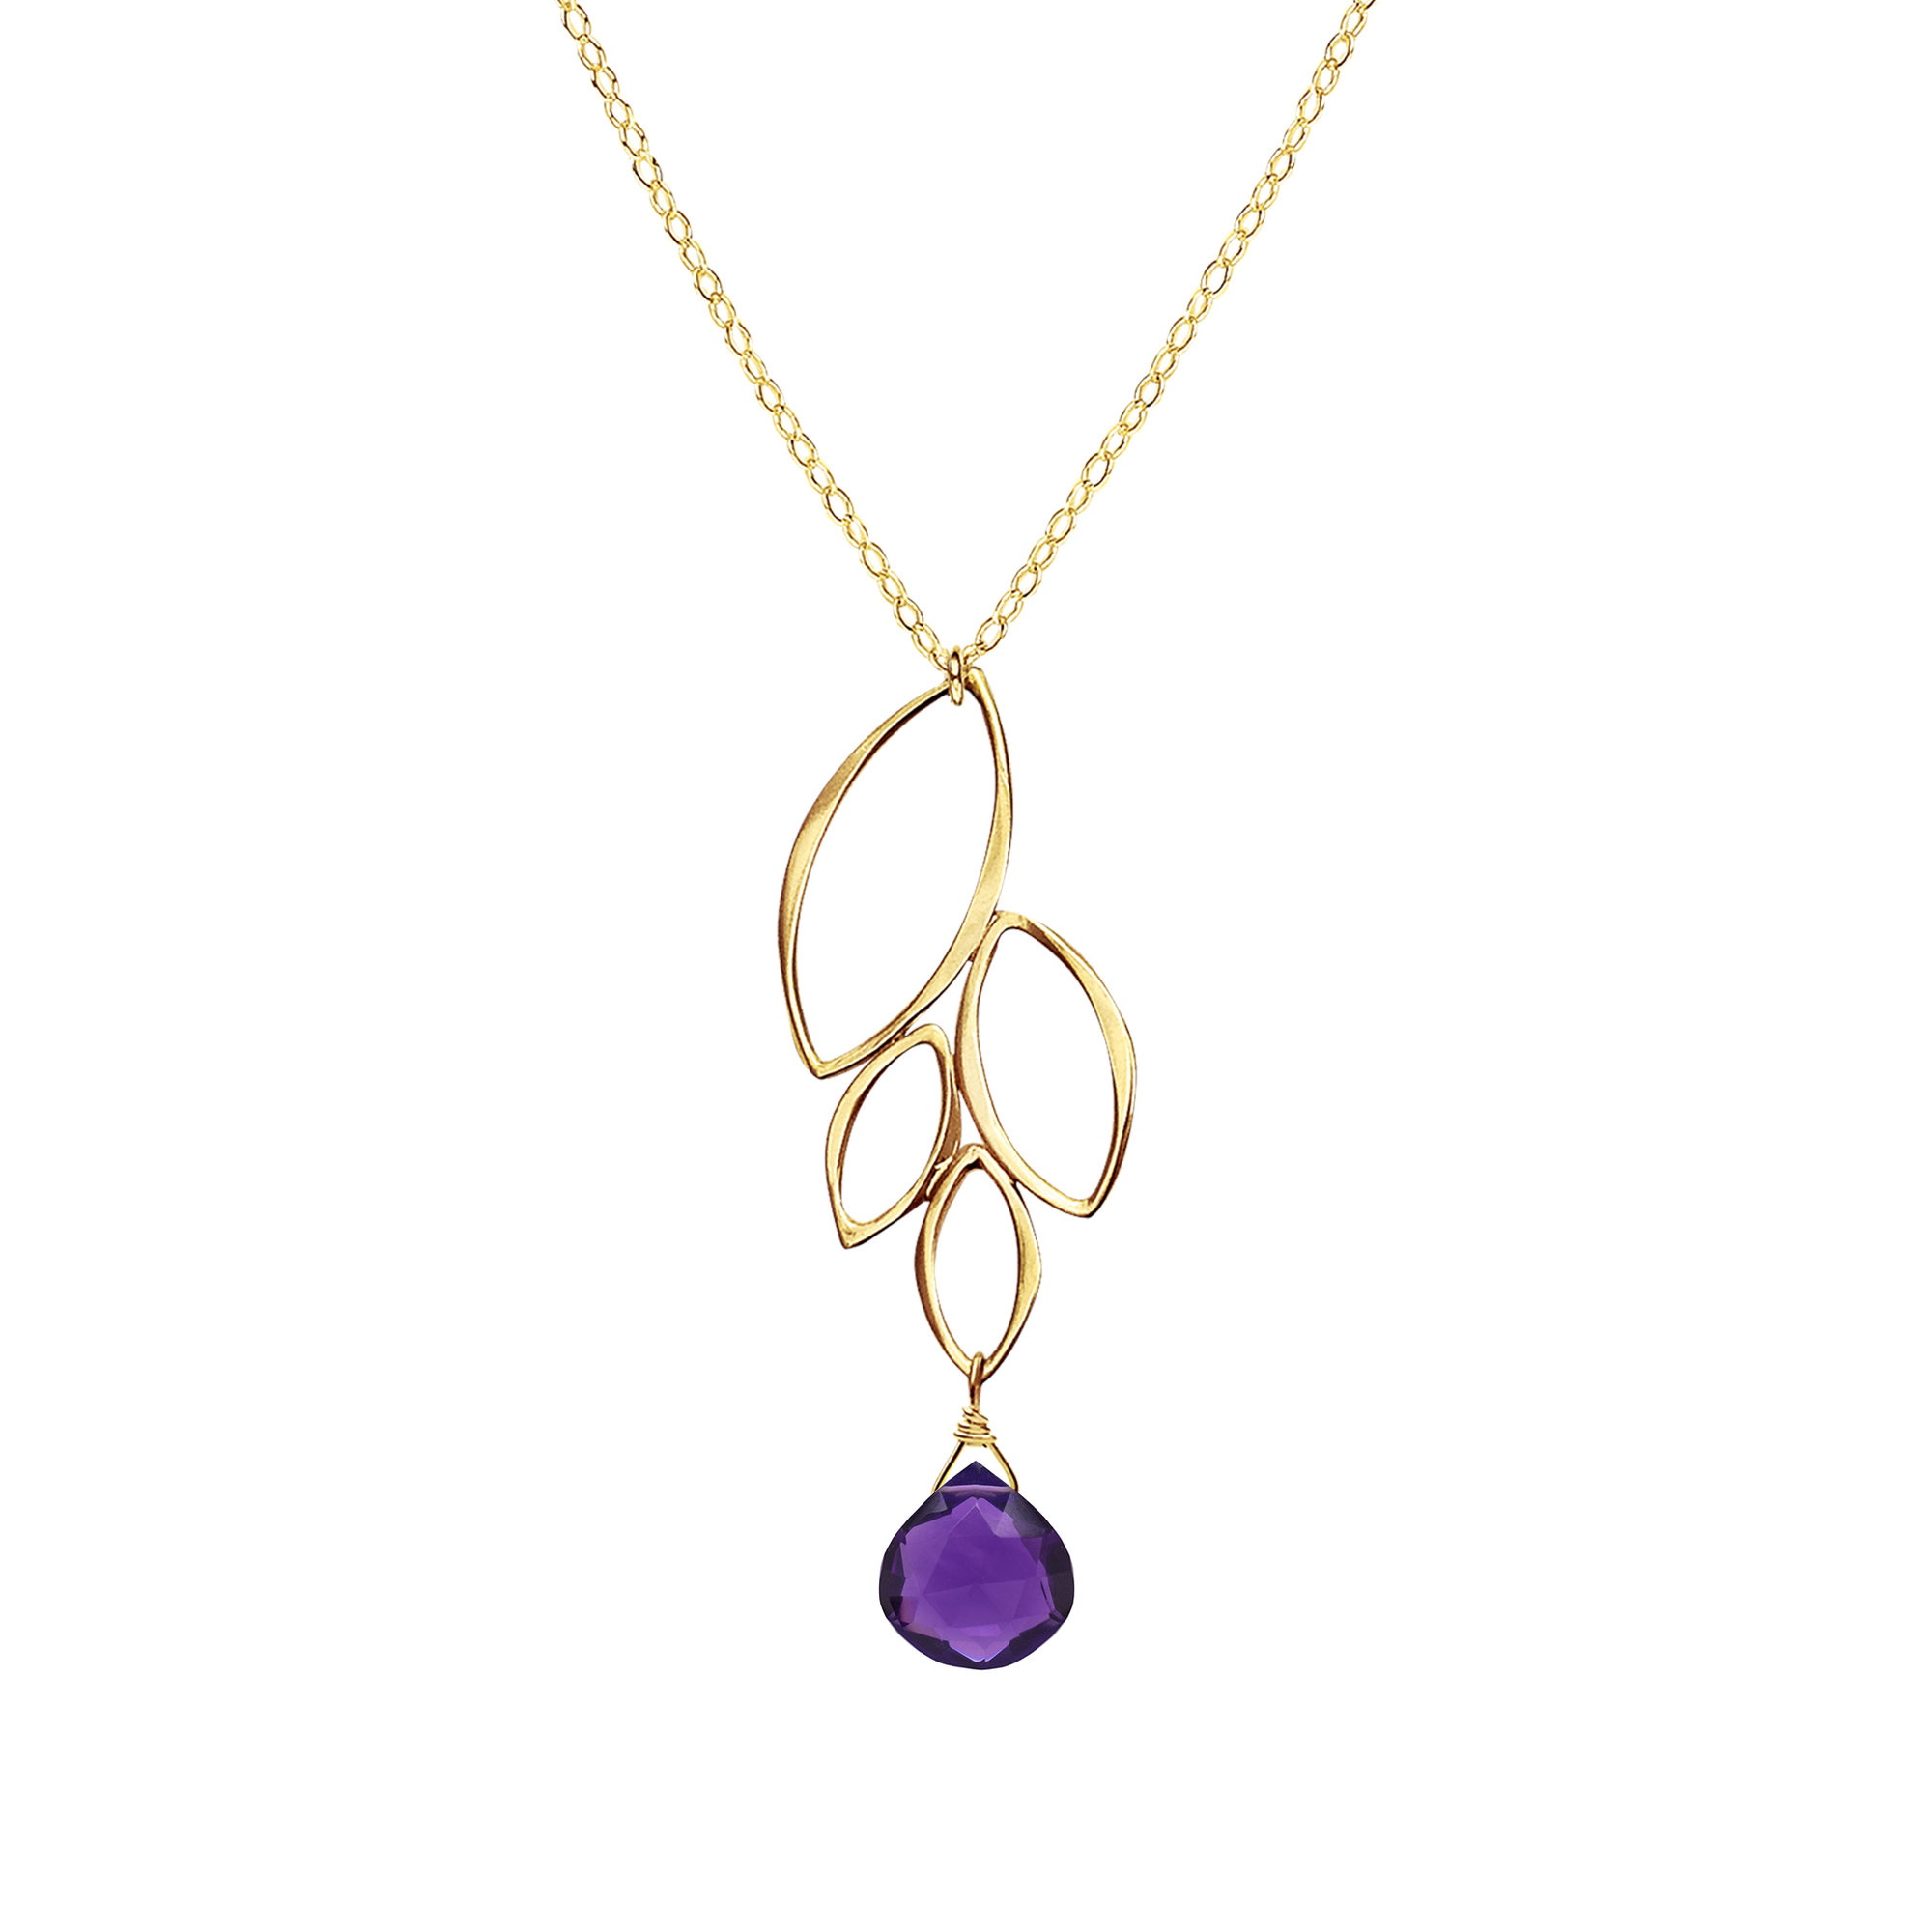 Image of a gold four leaf dangle necklace with dark purple amethyst gemstone on white background